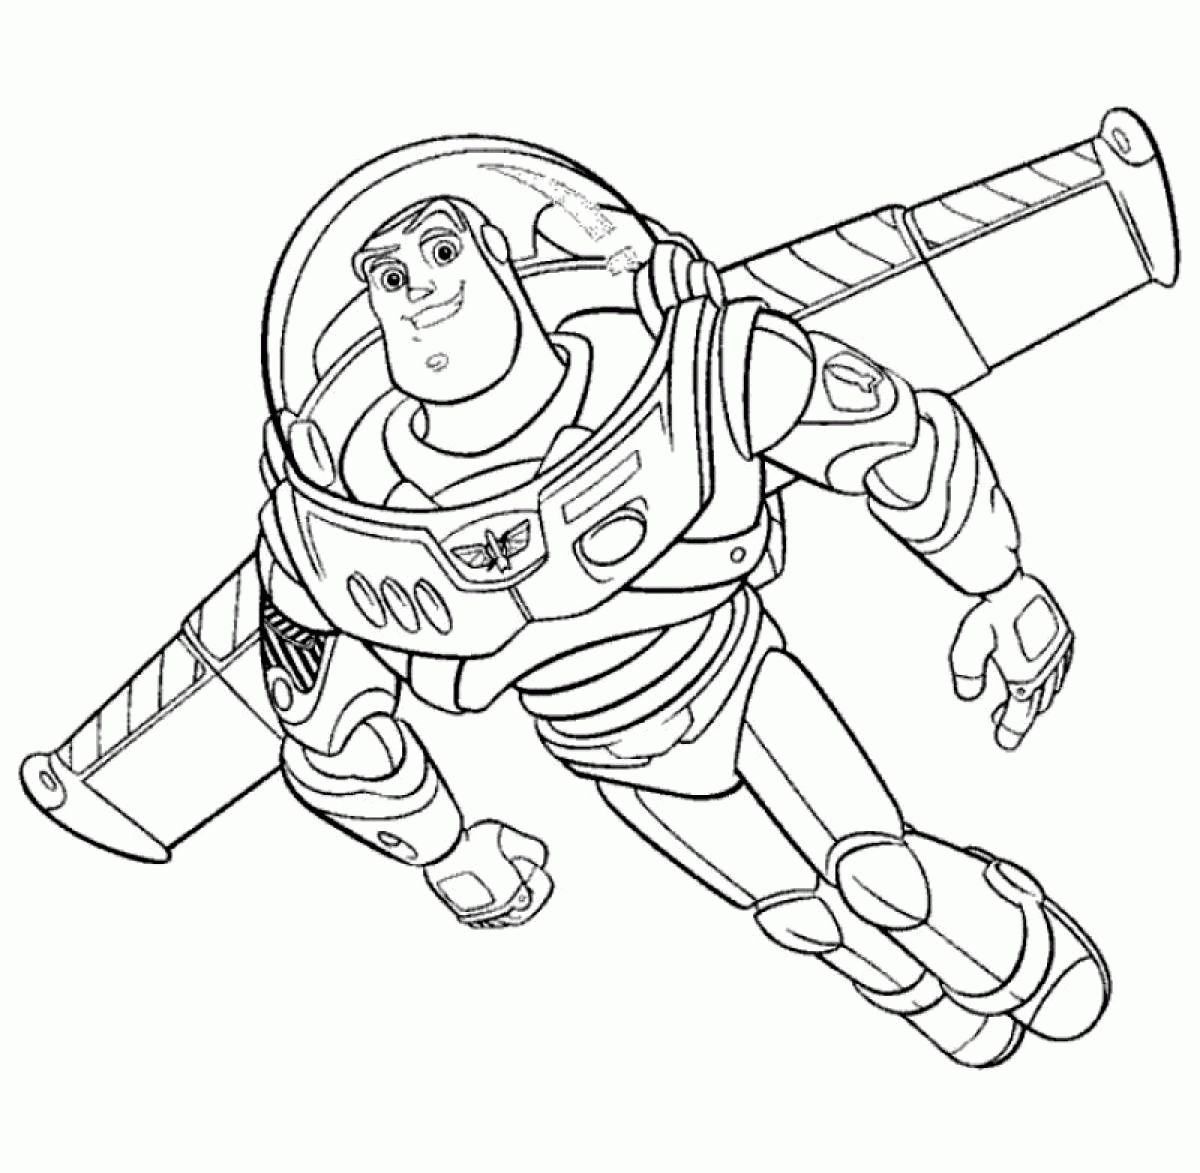 Toy Story Jessie Coloring Page Free - Coloring Home